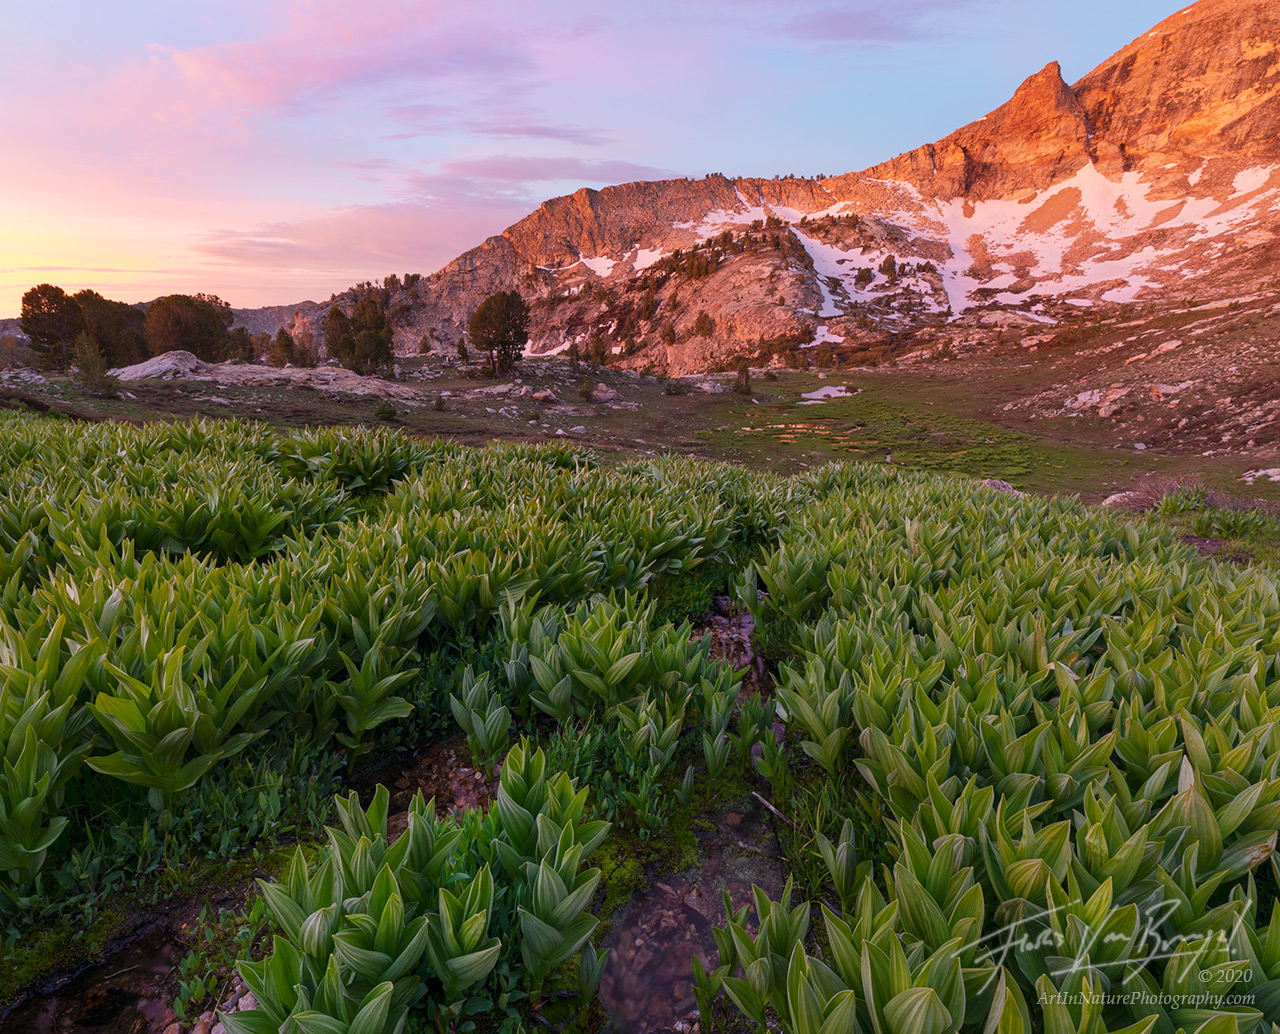 Endless fields of emerald green corn lilies burst into life after the winter snow melts. Although the Ruby Mountains were named...